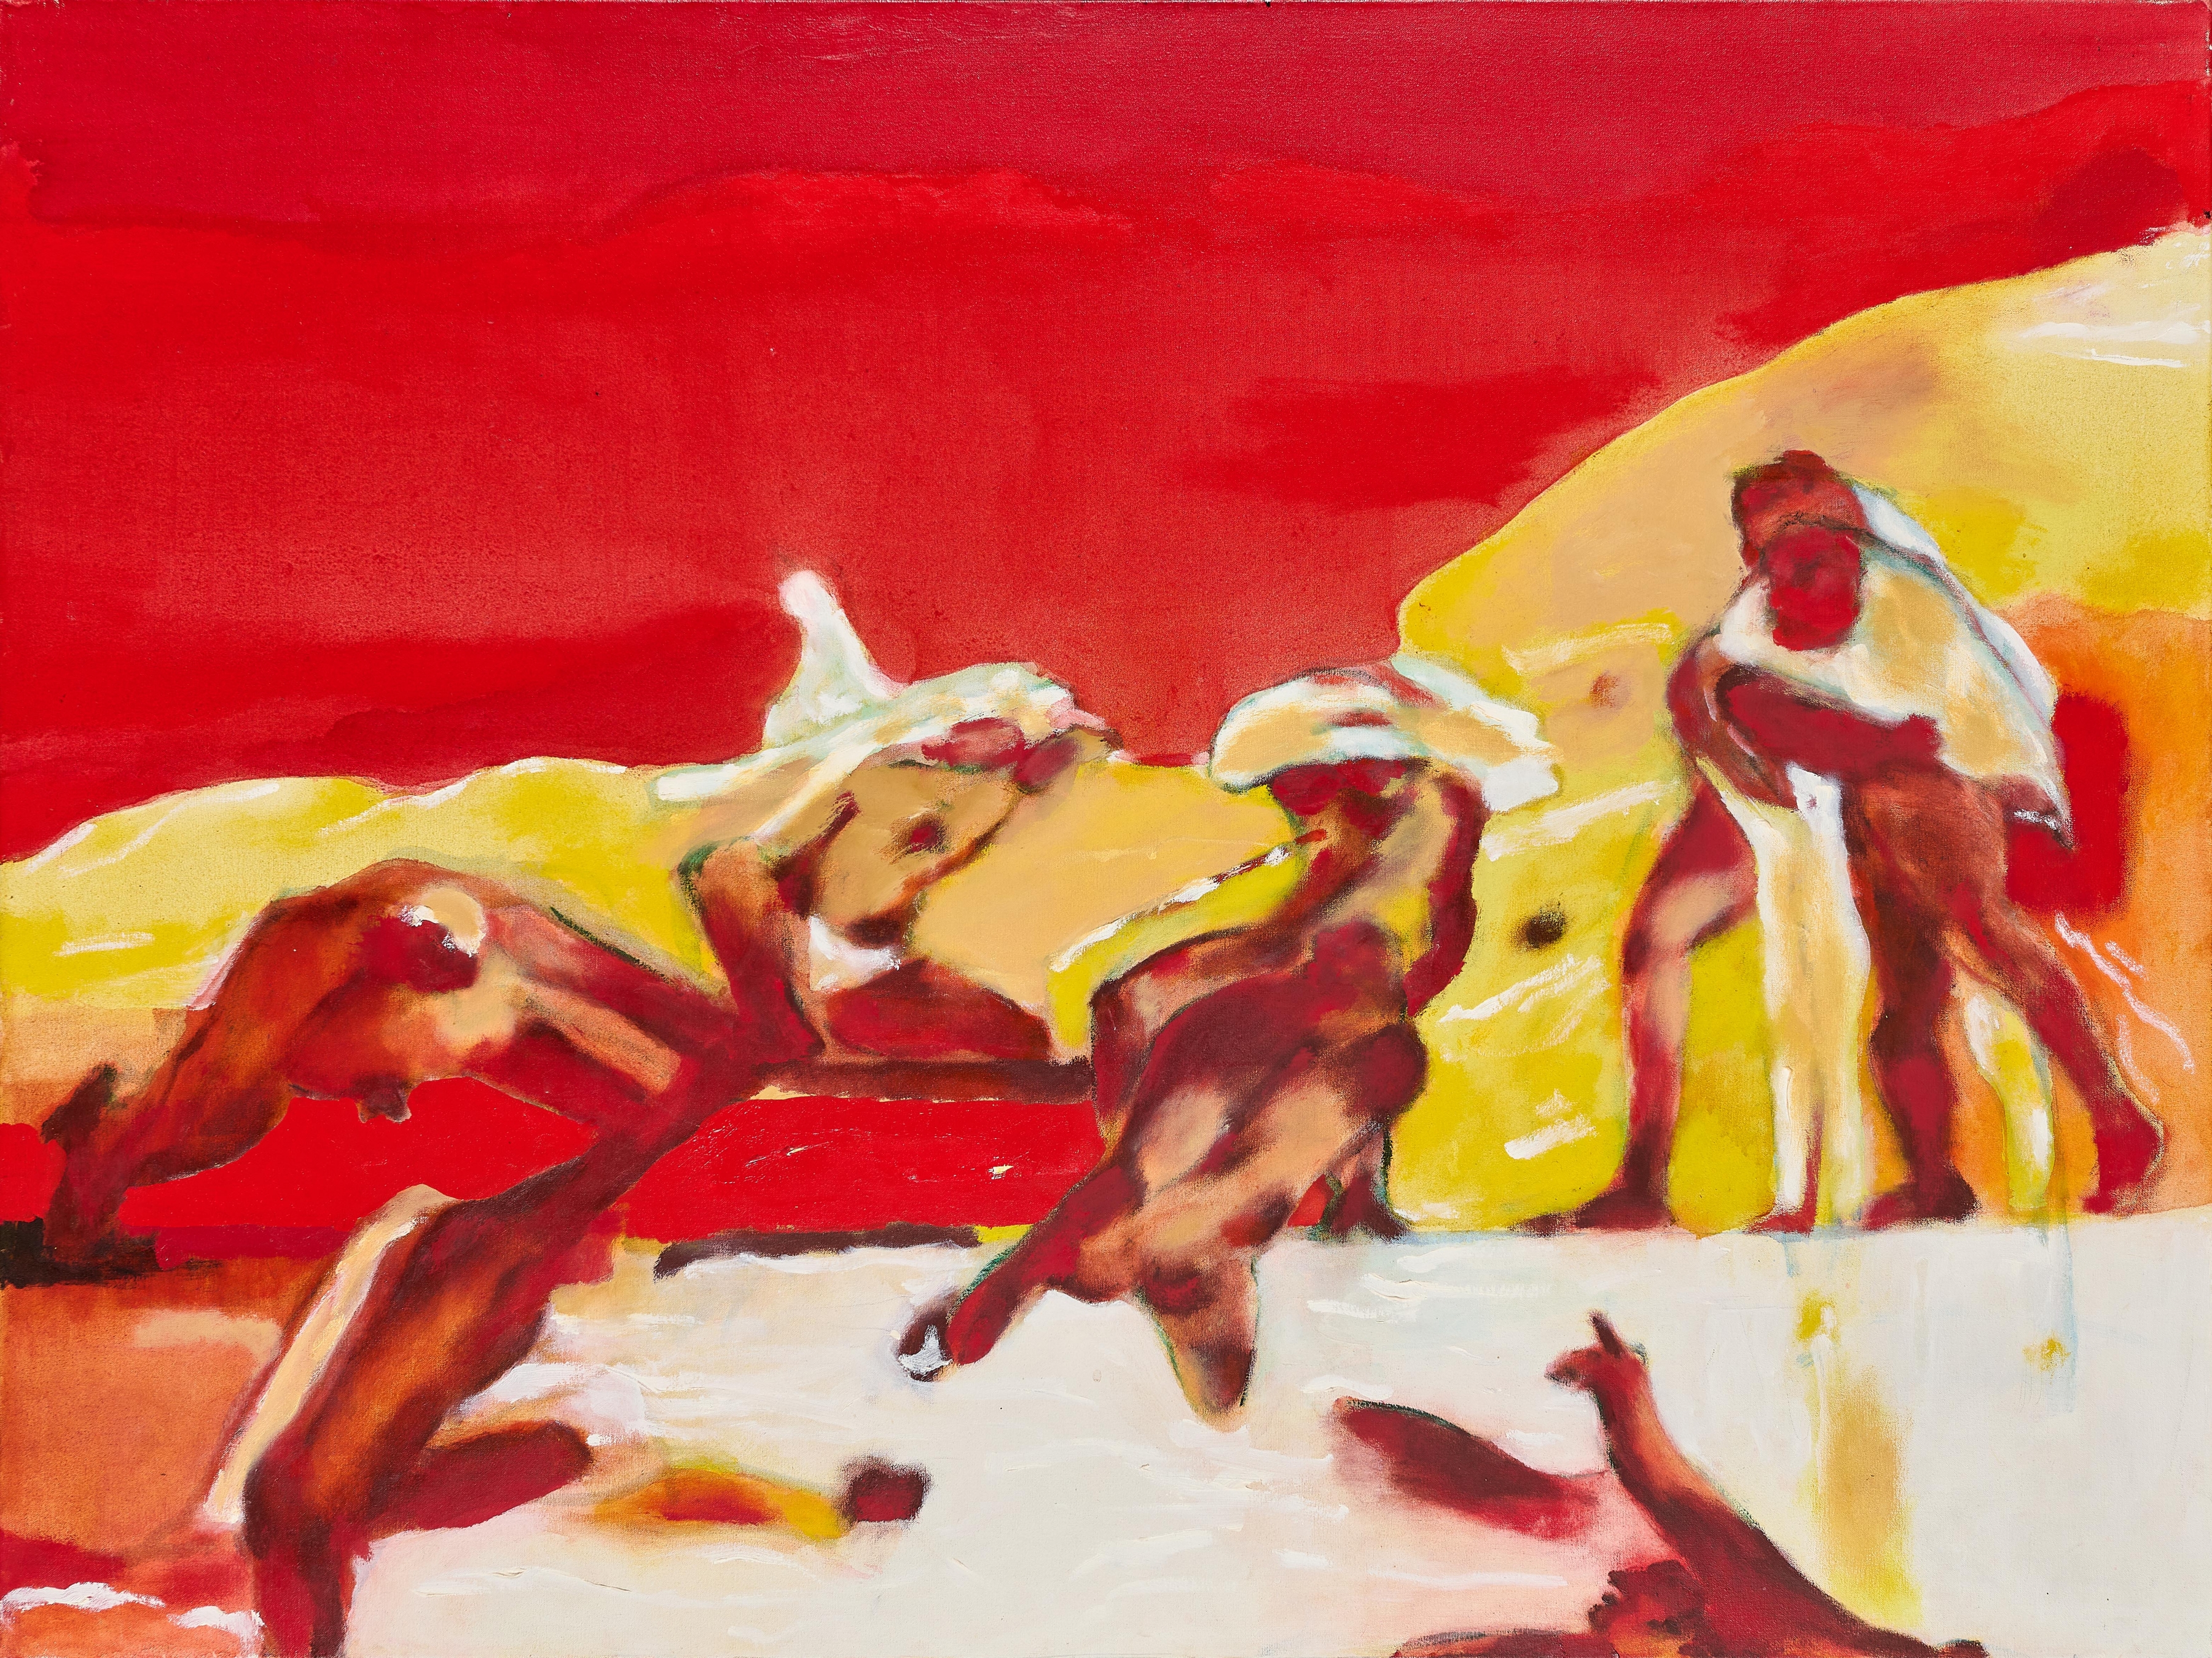 Robert Hodgins

The Battle of Cascina II, 2006

Oil on canvas

92.5 x 122.5 cm (36.2 x 48 in)

Enquire